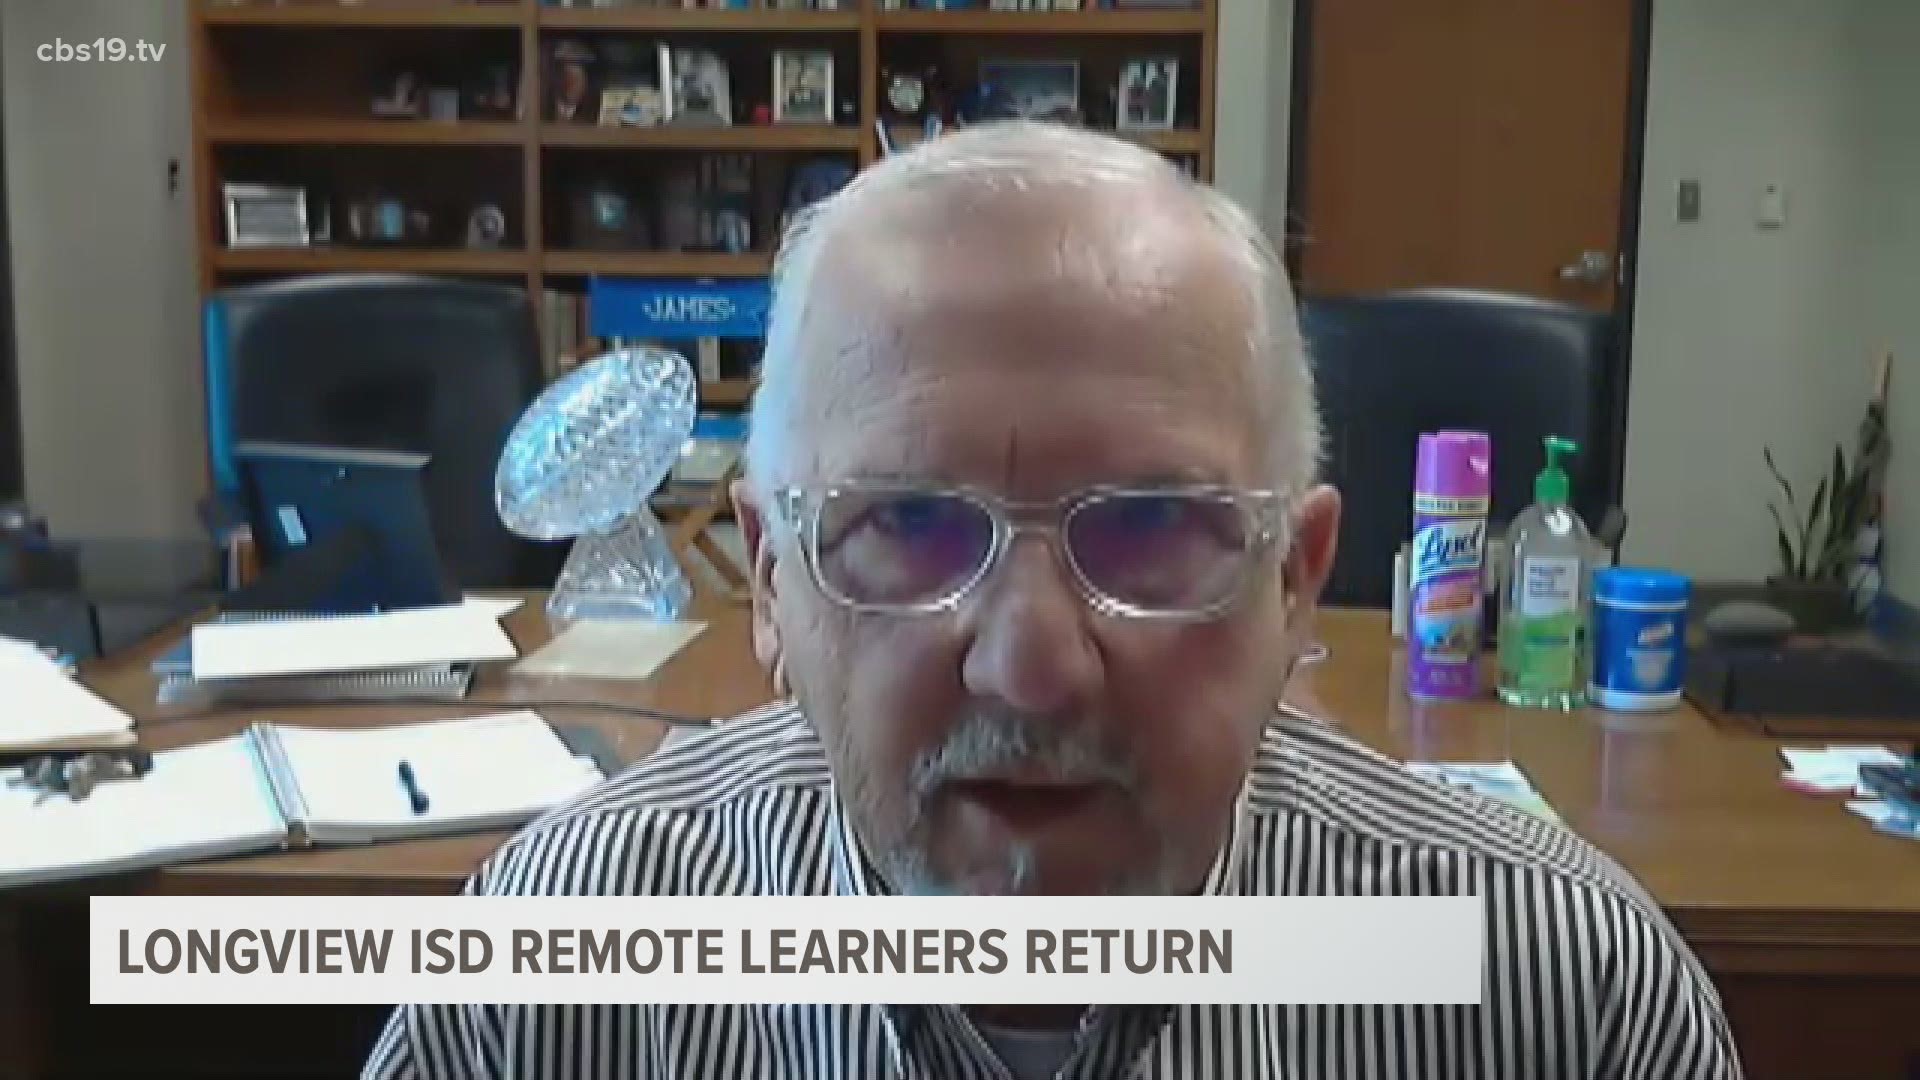 With six weeks left in the school year, Longview ISD virtual learners returned back to the classroom.